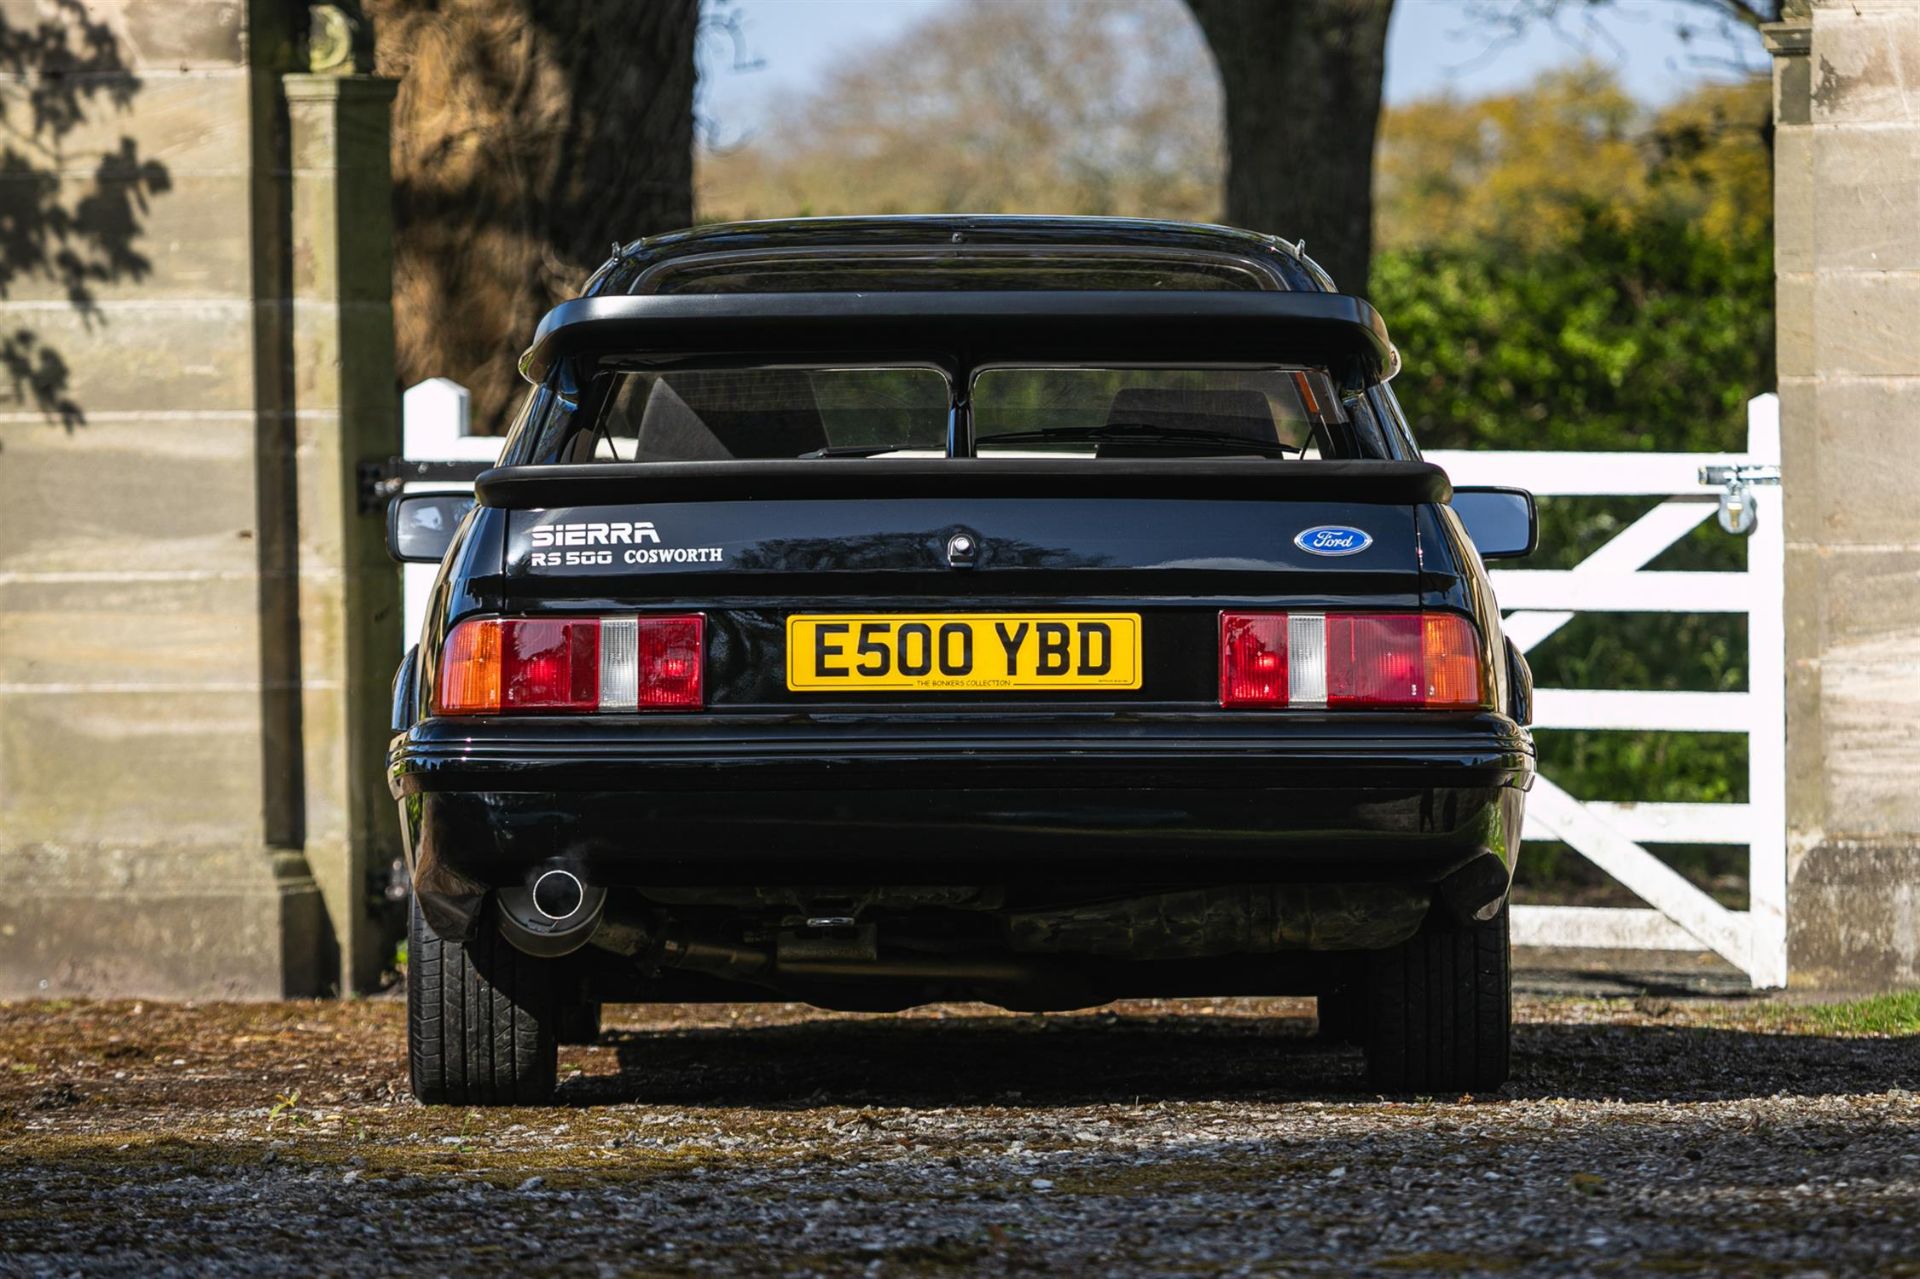 1988 Ford Sierra RS500 Cosworth - 13,985 Miles - Image 7 of 10